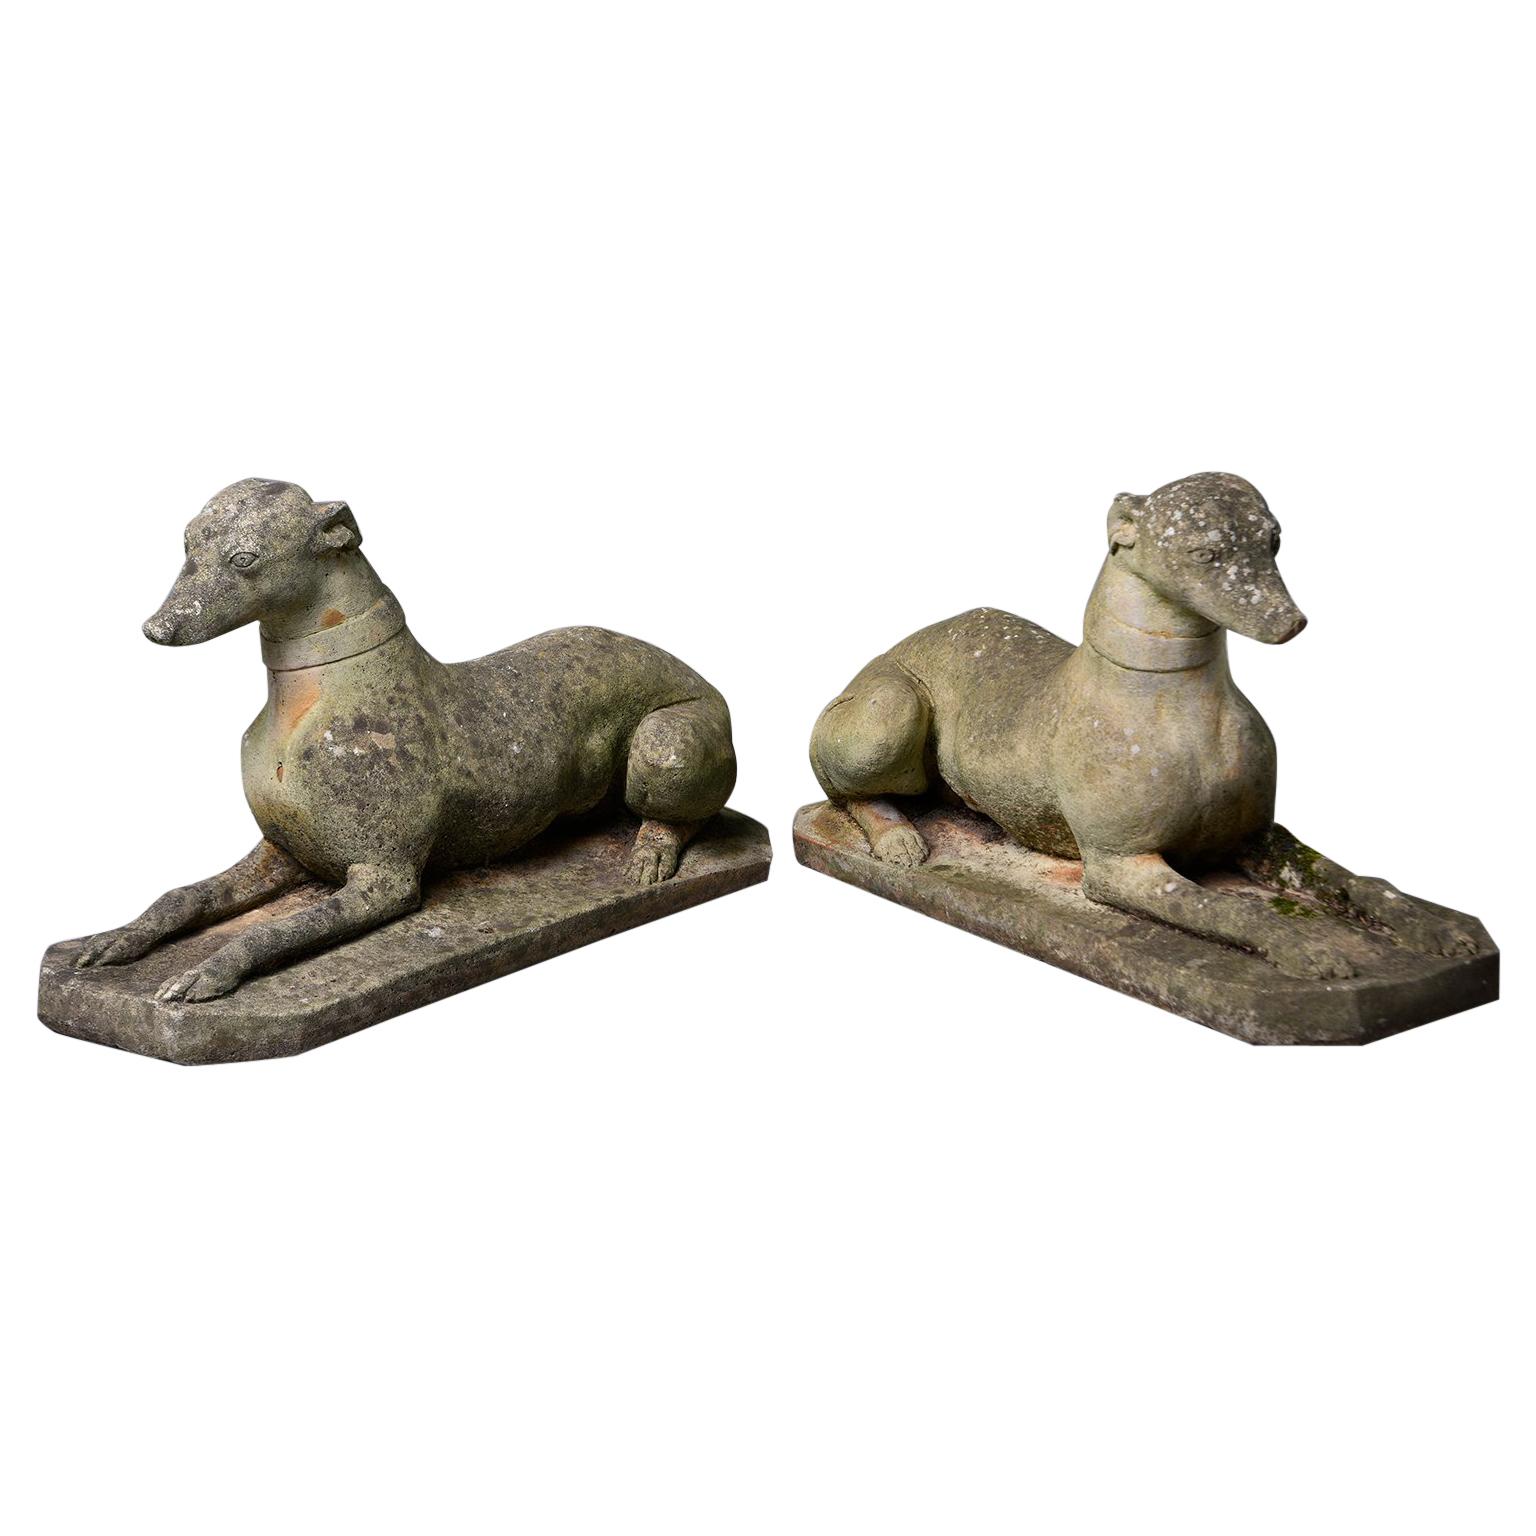 Pair of Vintage English Stone Garden Whippets